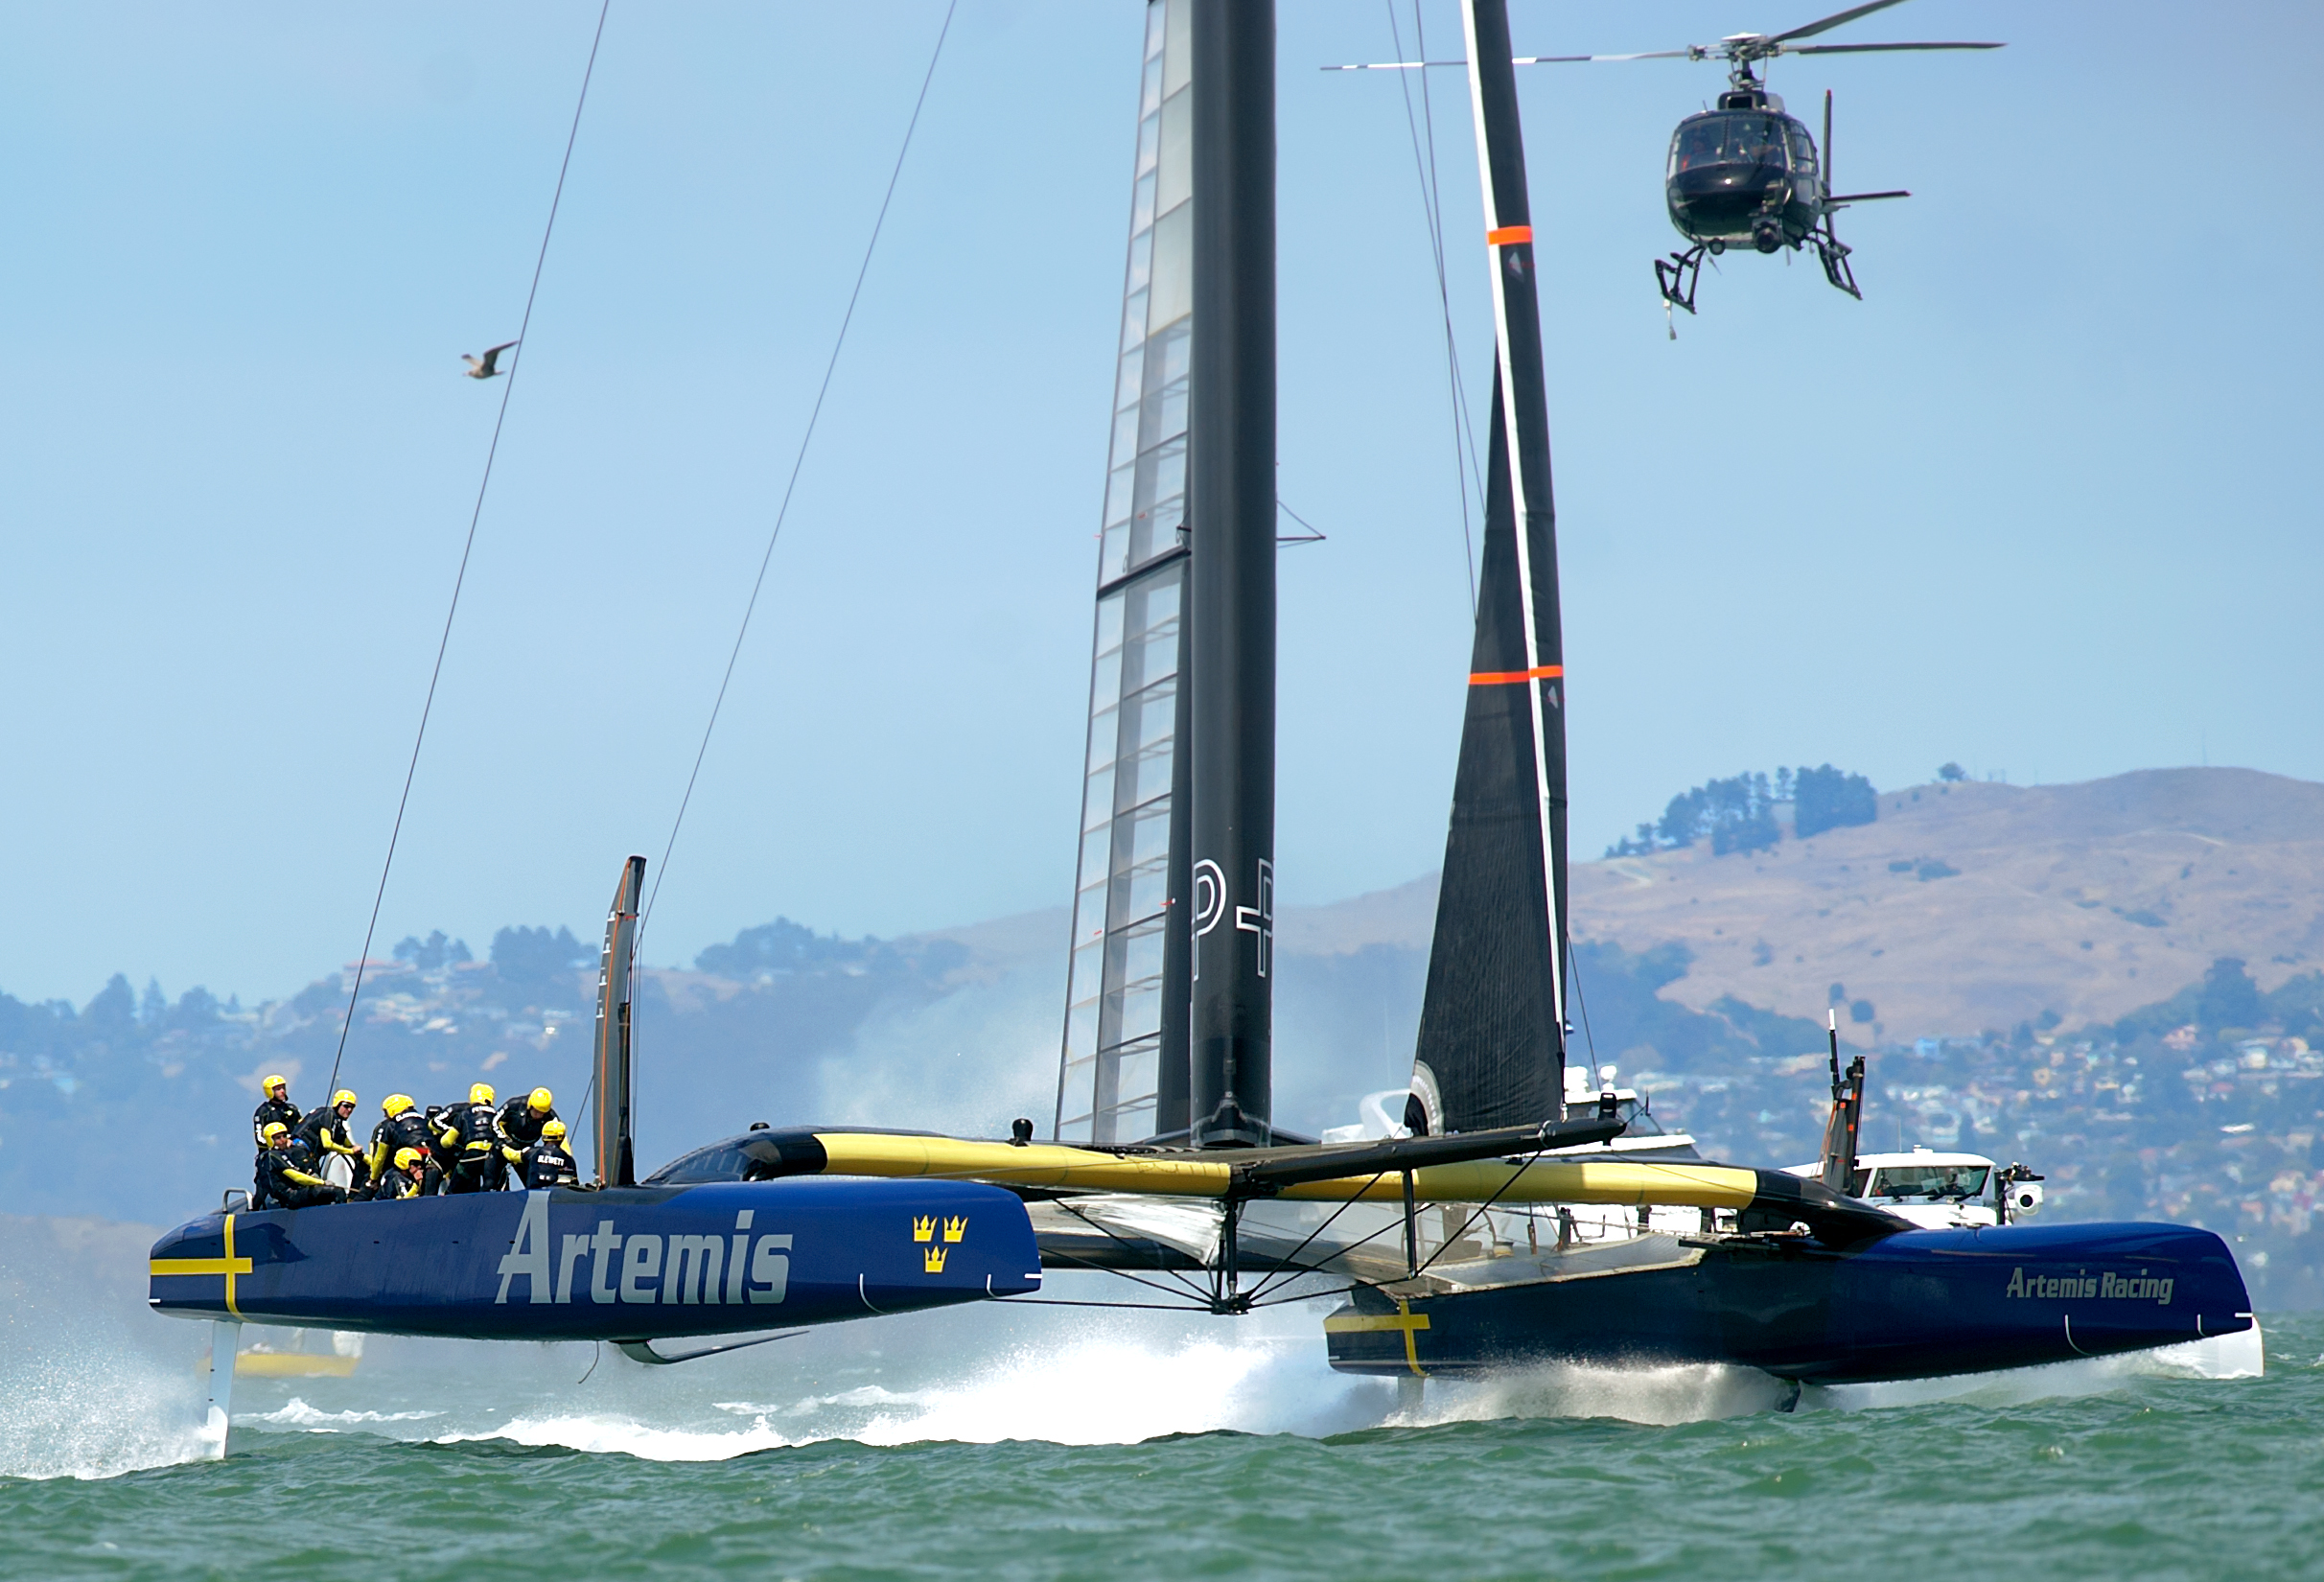 Sweden's Artemis Racing approaches the finish line while racing Italy's Luna Rossa Challenge in a Louis Vuitton Cup semi-finals match on August 6, 2013, in San Francisco. Artemis, sailing its first race since a May 9 capsize killed crewman Andrew 'Bart' Simpson, lost to the Italian team by just under two minutes. (credit: Noah Berger/AFP/Getty Images)